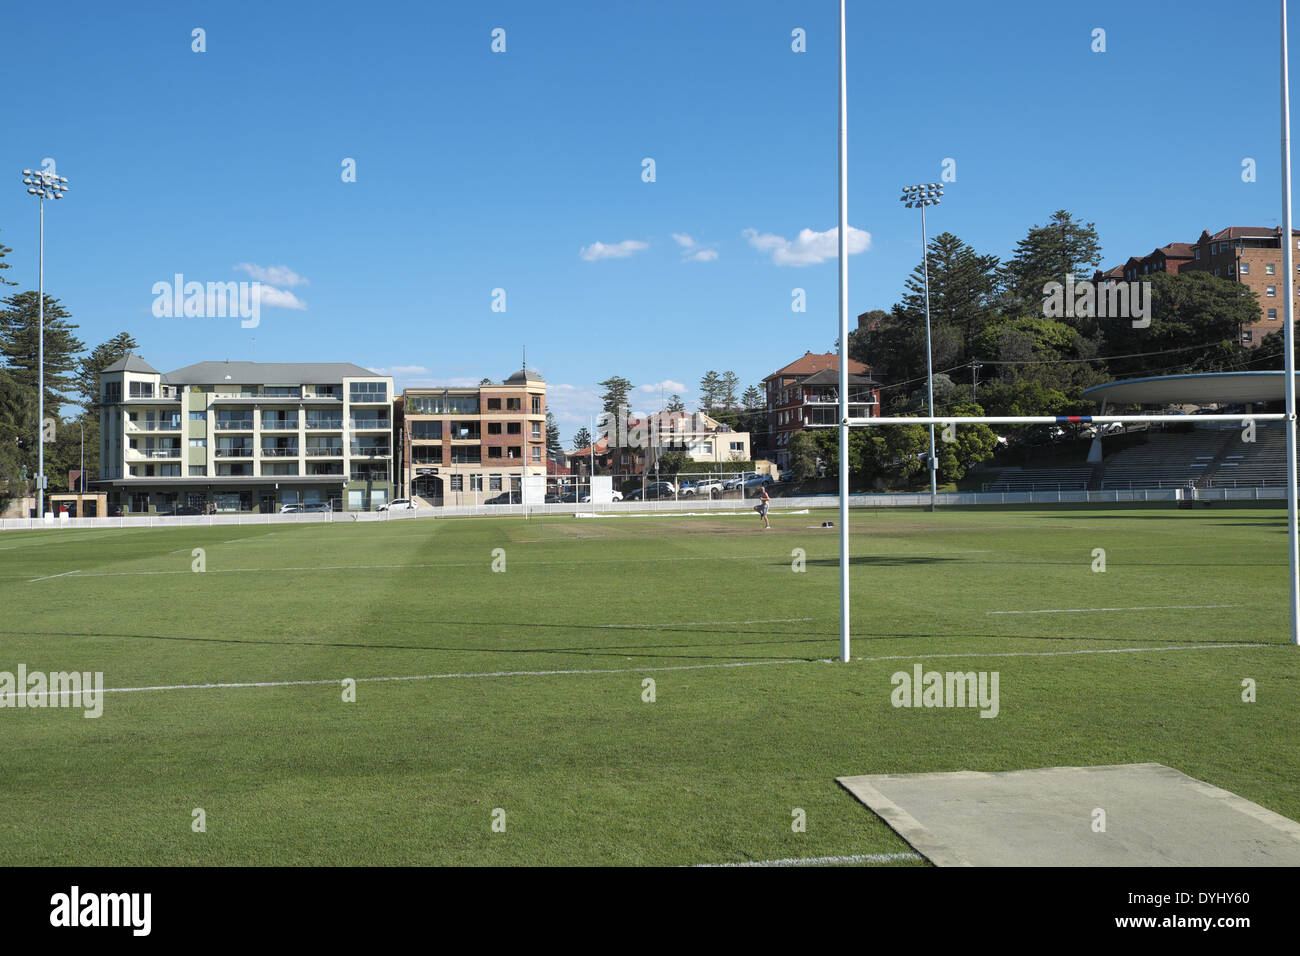 football Manly oval sports ground on pittwater road,manly,sydney,australia Stock Photo